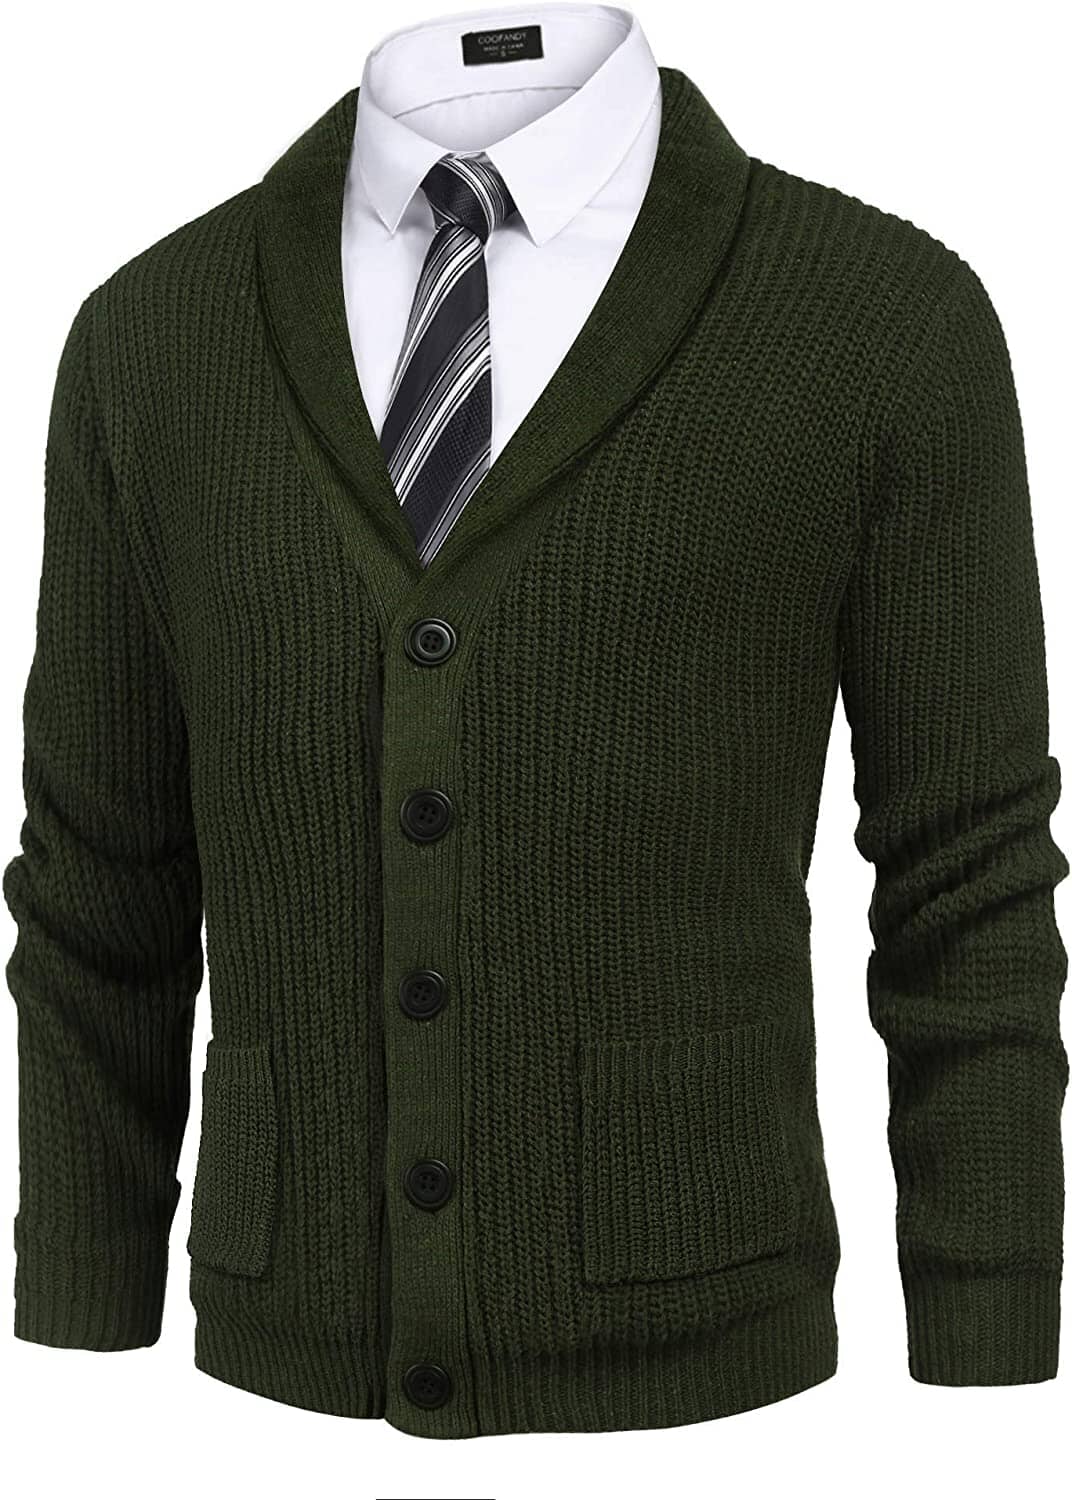 Lapel Button Up Cable Knit Cardigan with Pockets (US Only) Cardigans COOFANDY Store Army Green S 